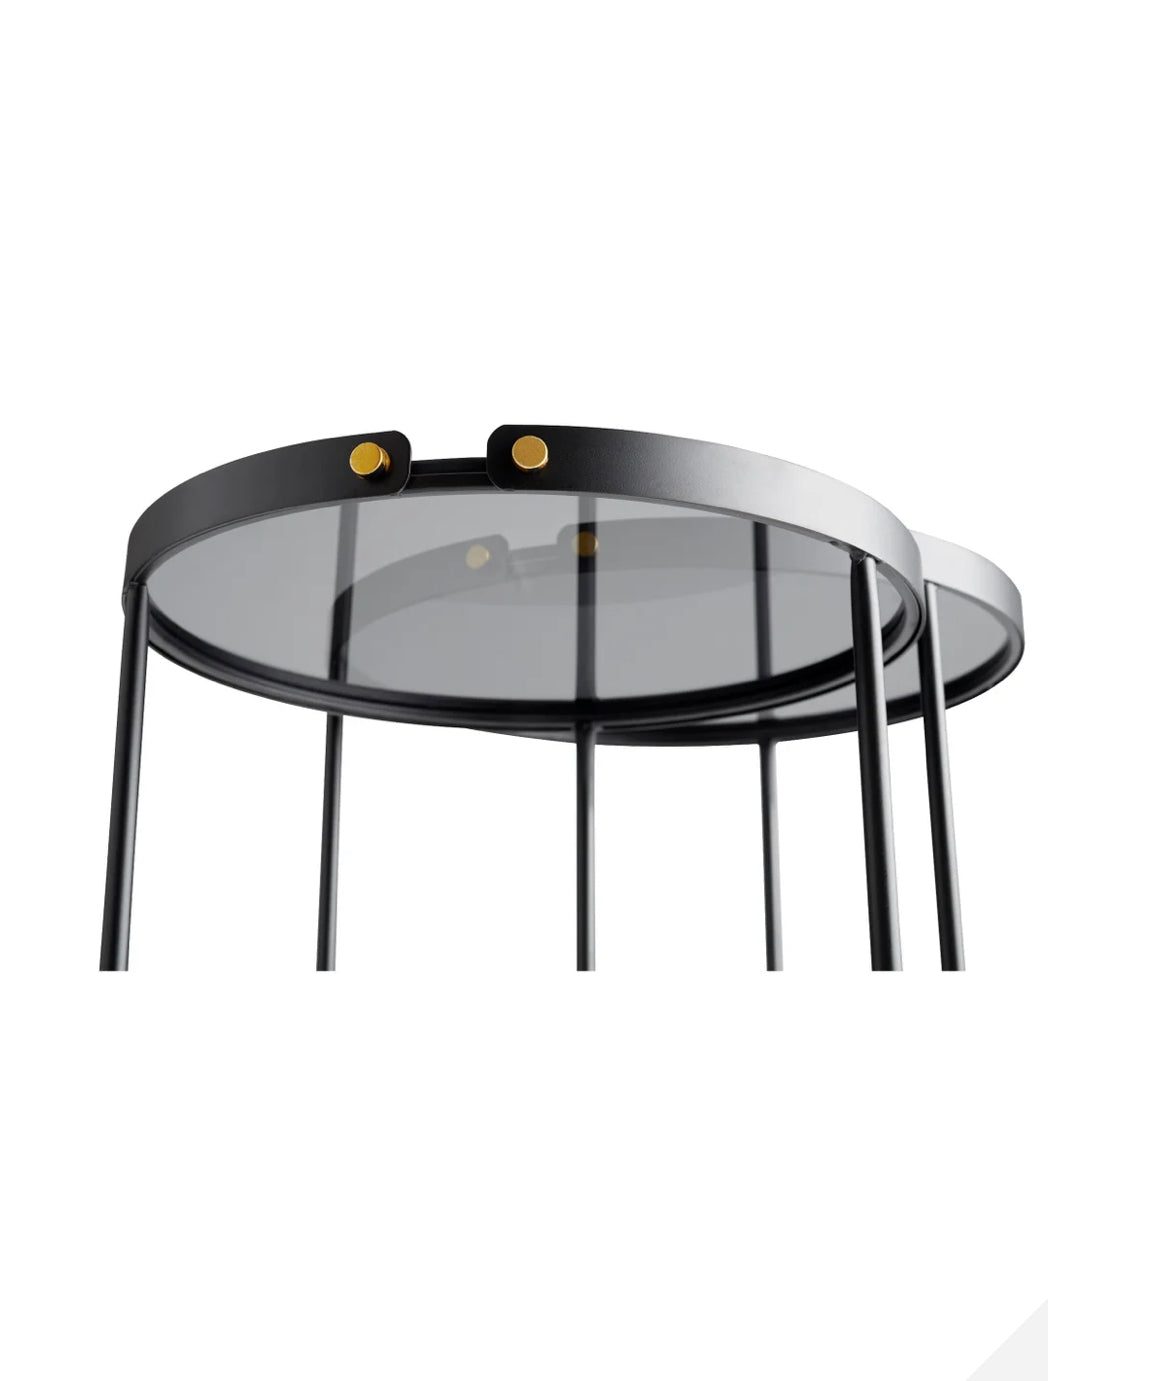 This 2-piece table set consists of a slender design and is rendered in a regal dark monochrome. The table top is glass and is gracefully supported by a semi-circular base.  Qty Available: 1  Dimensions: L 19.00 X W 19.00 X H 20.00  Weight: 27.3 lbs.  Finish: Graphite Materials: Iron/Glass